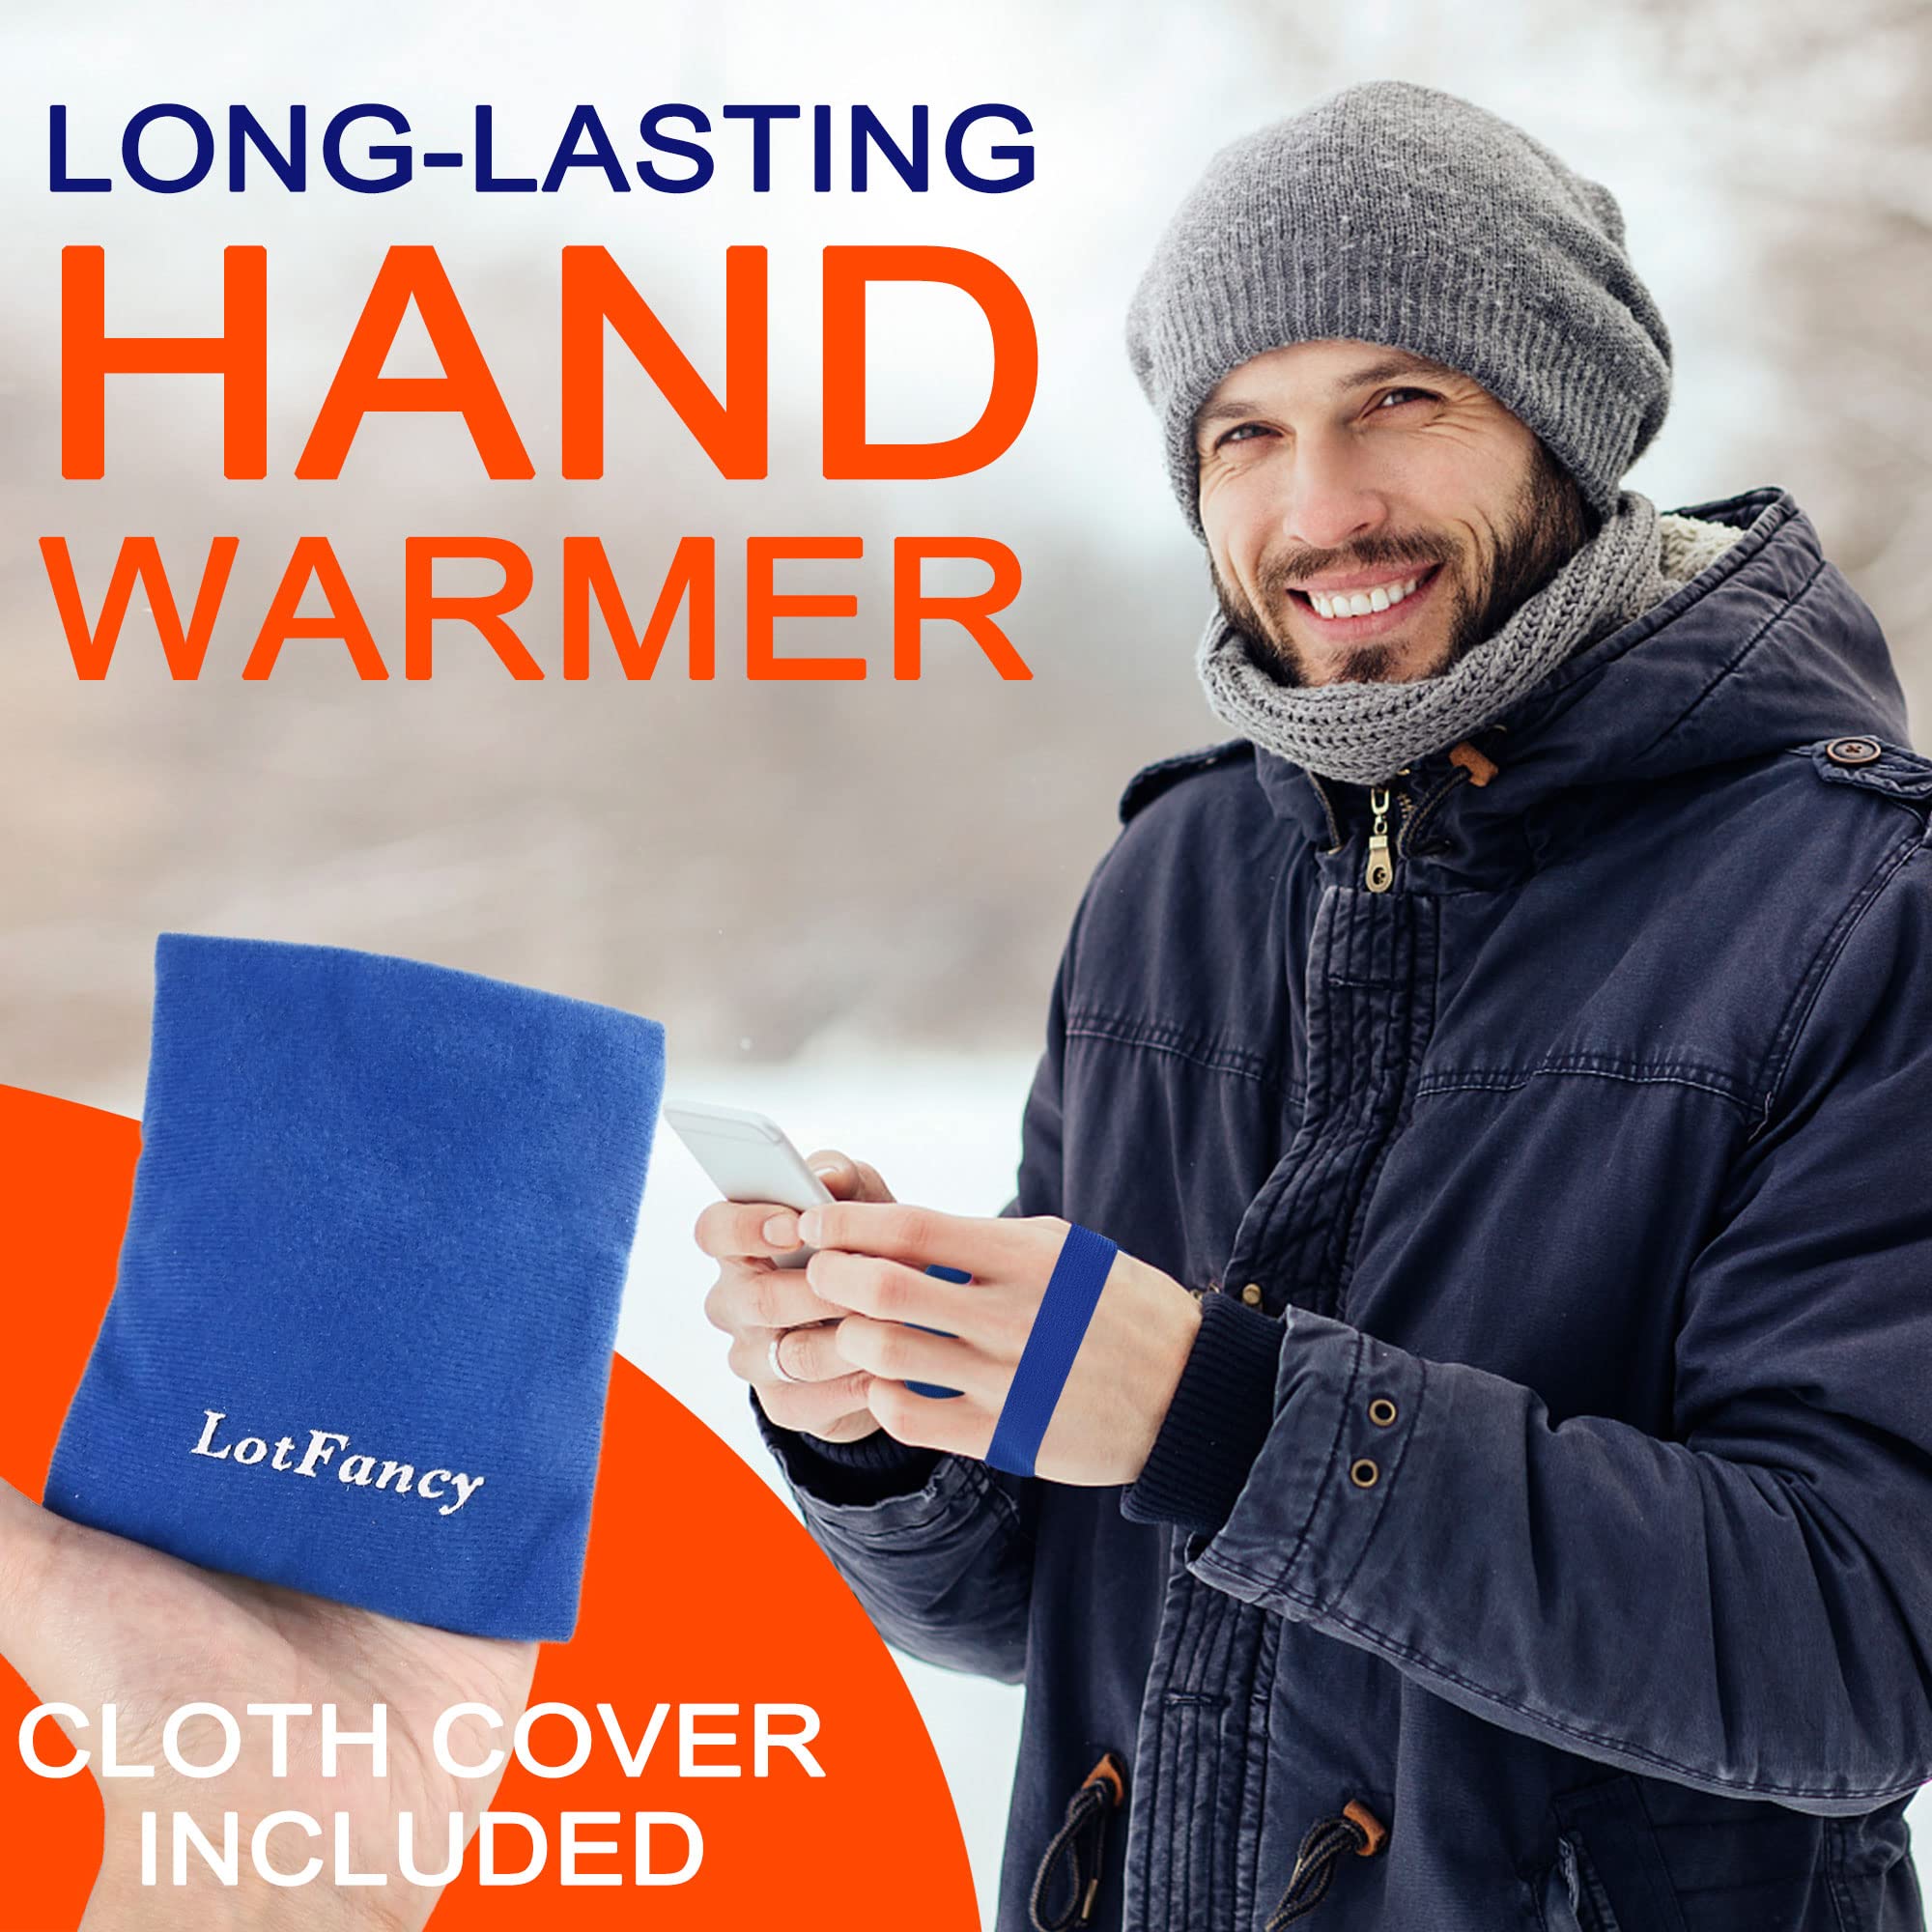 LotFancy Reusable Hand Warmer, 10 Click Activated Heat Packs and 2 Wraps, Gel Heating Pad, Instant Hot Cold Therapy Compress for Pain Relief, Outdoor & Portable Size